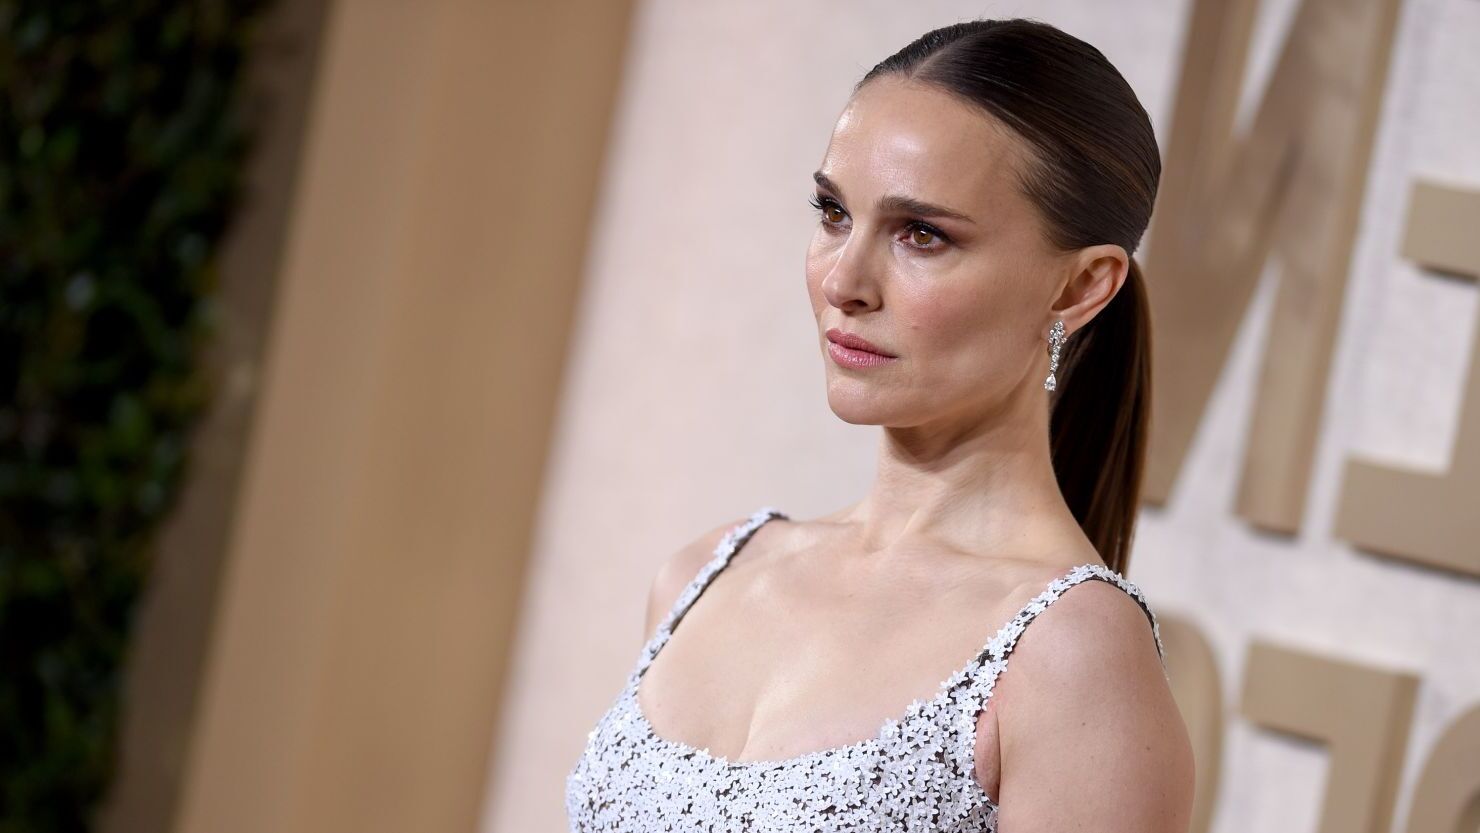 Natalie Portman’s Concerns About The Declining Influence Of Movie Stars On Kids